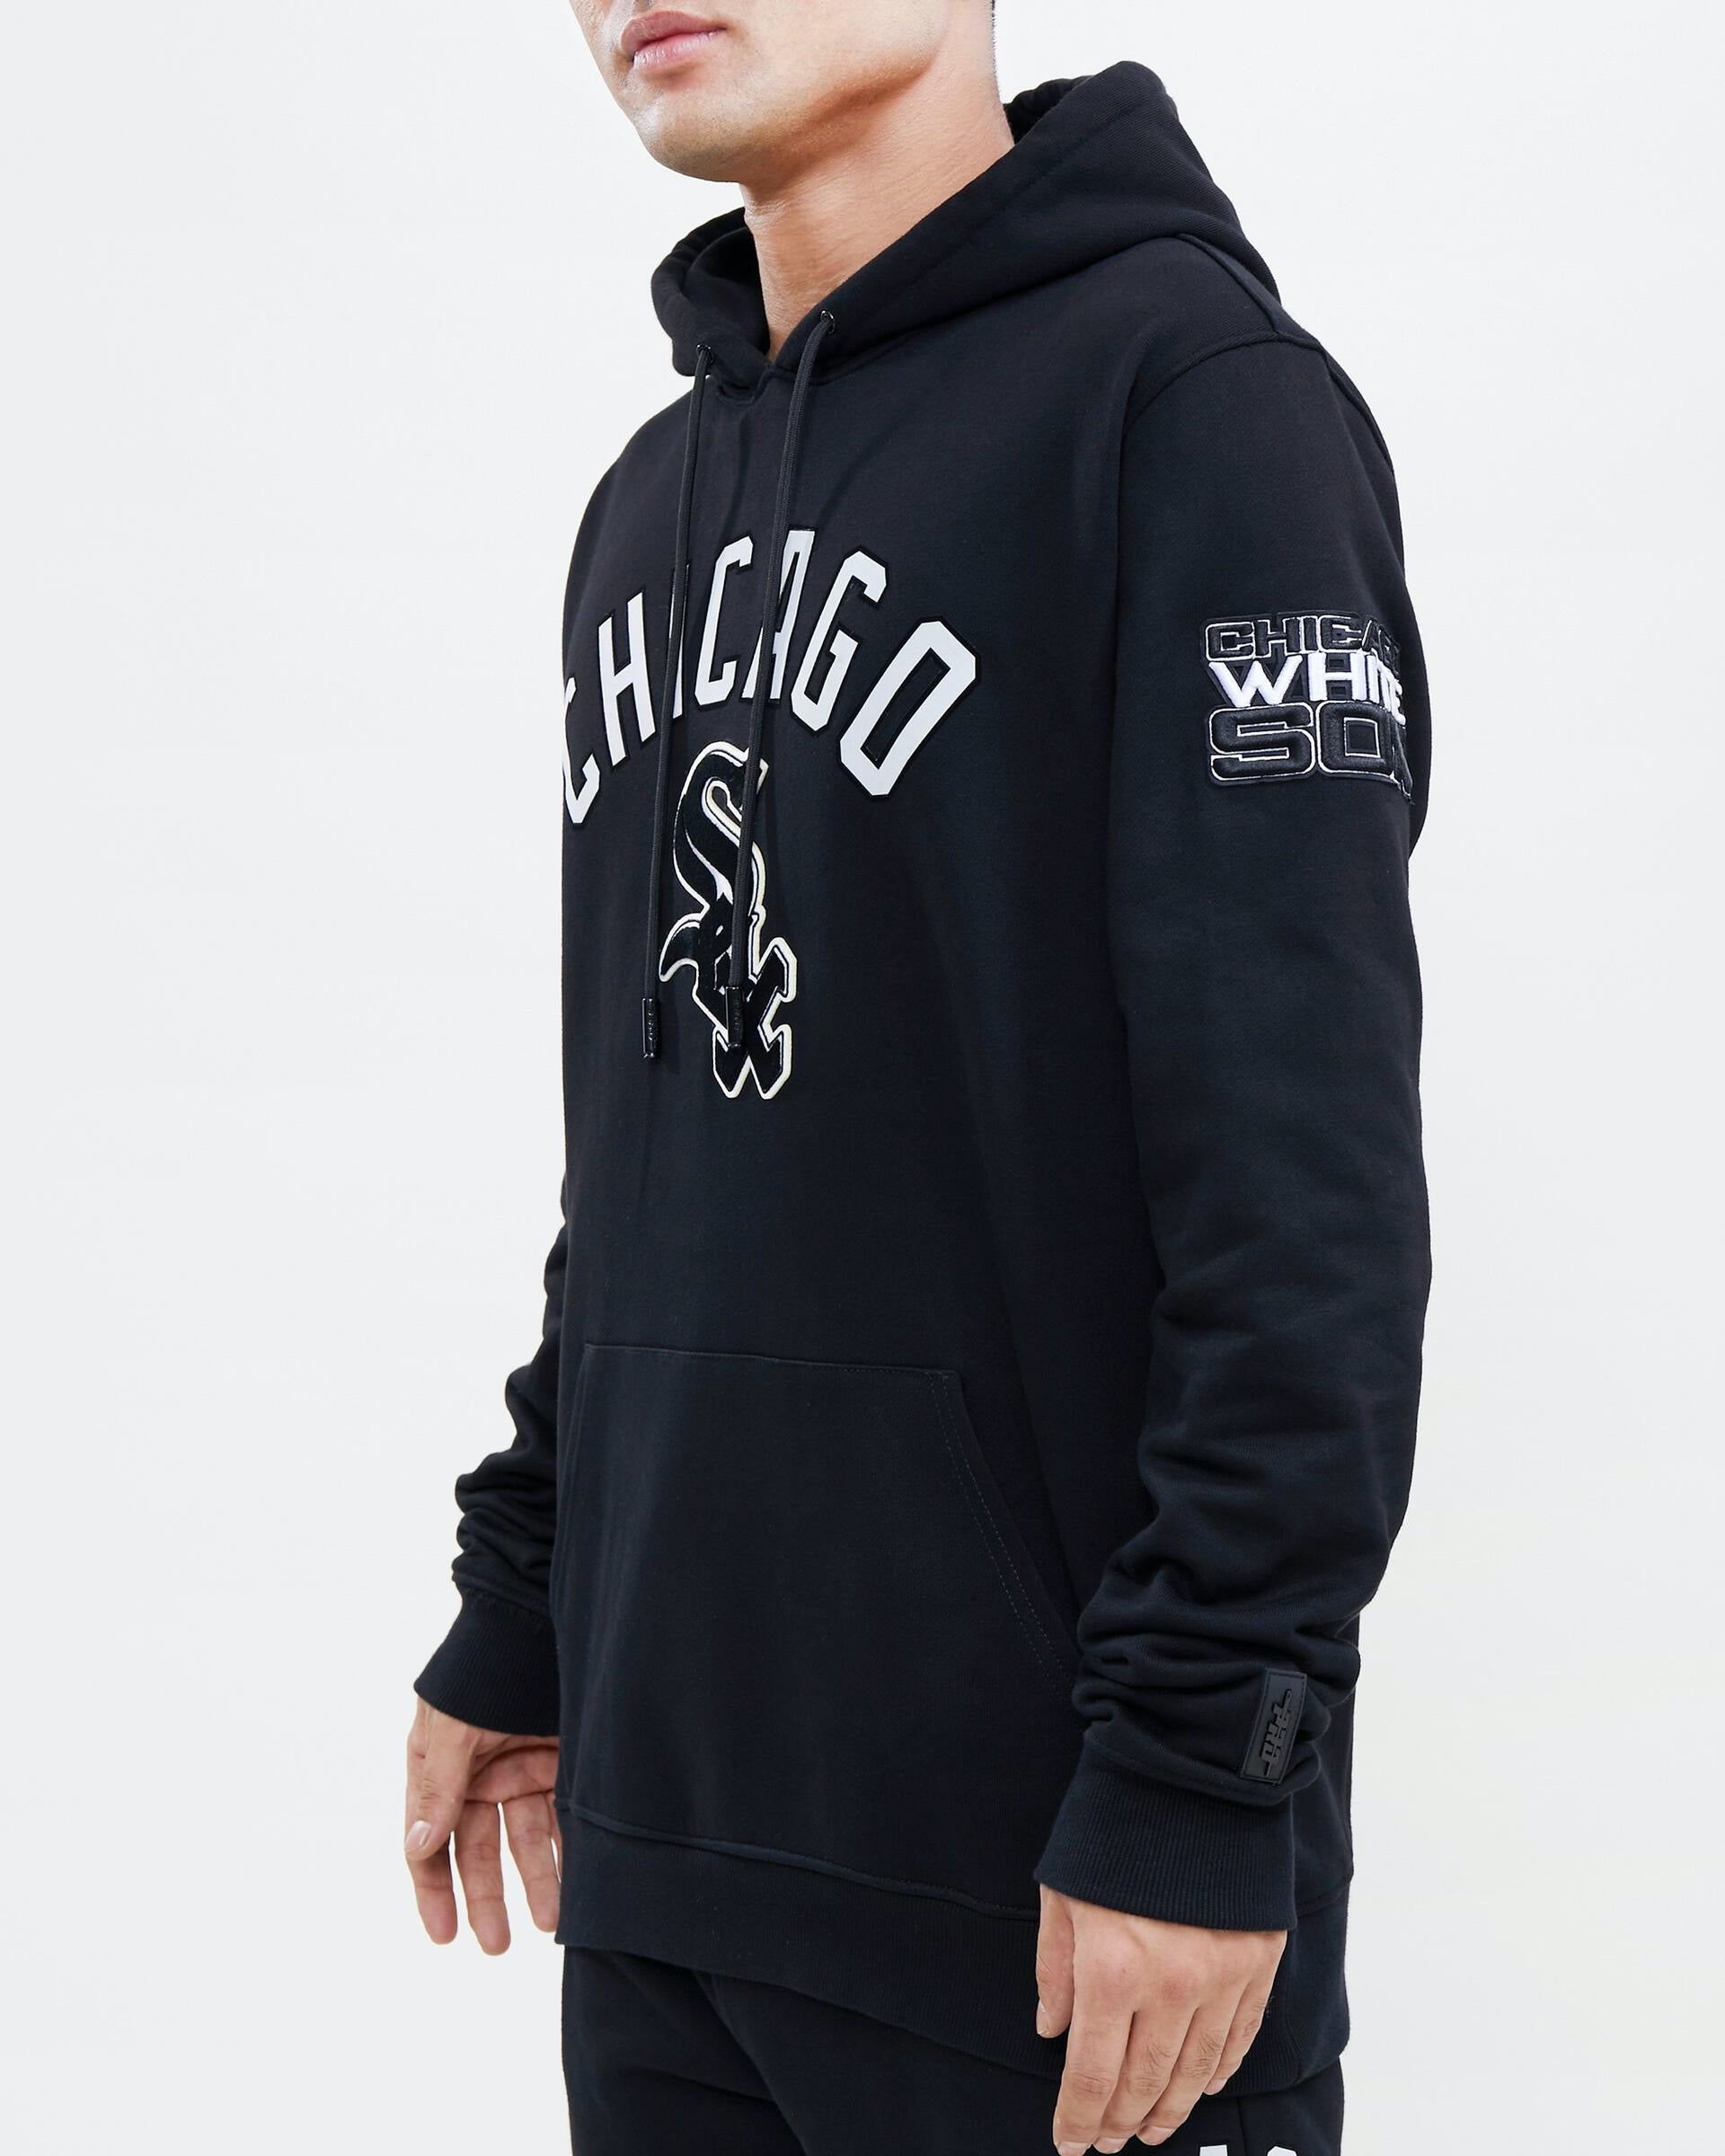 CHICAGO WHITE SOX LOGO STACKED HOODIE